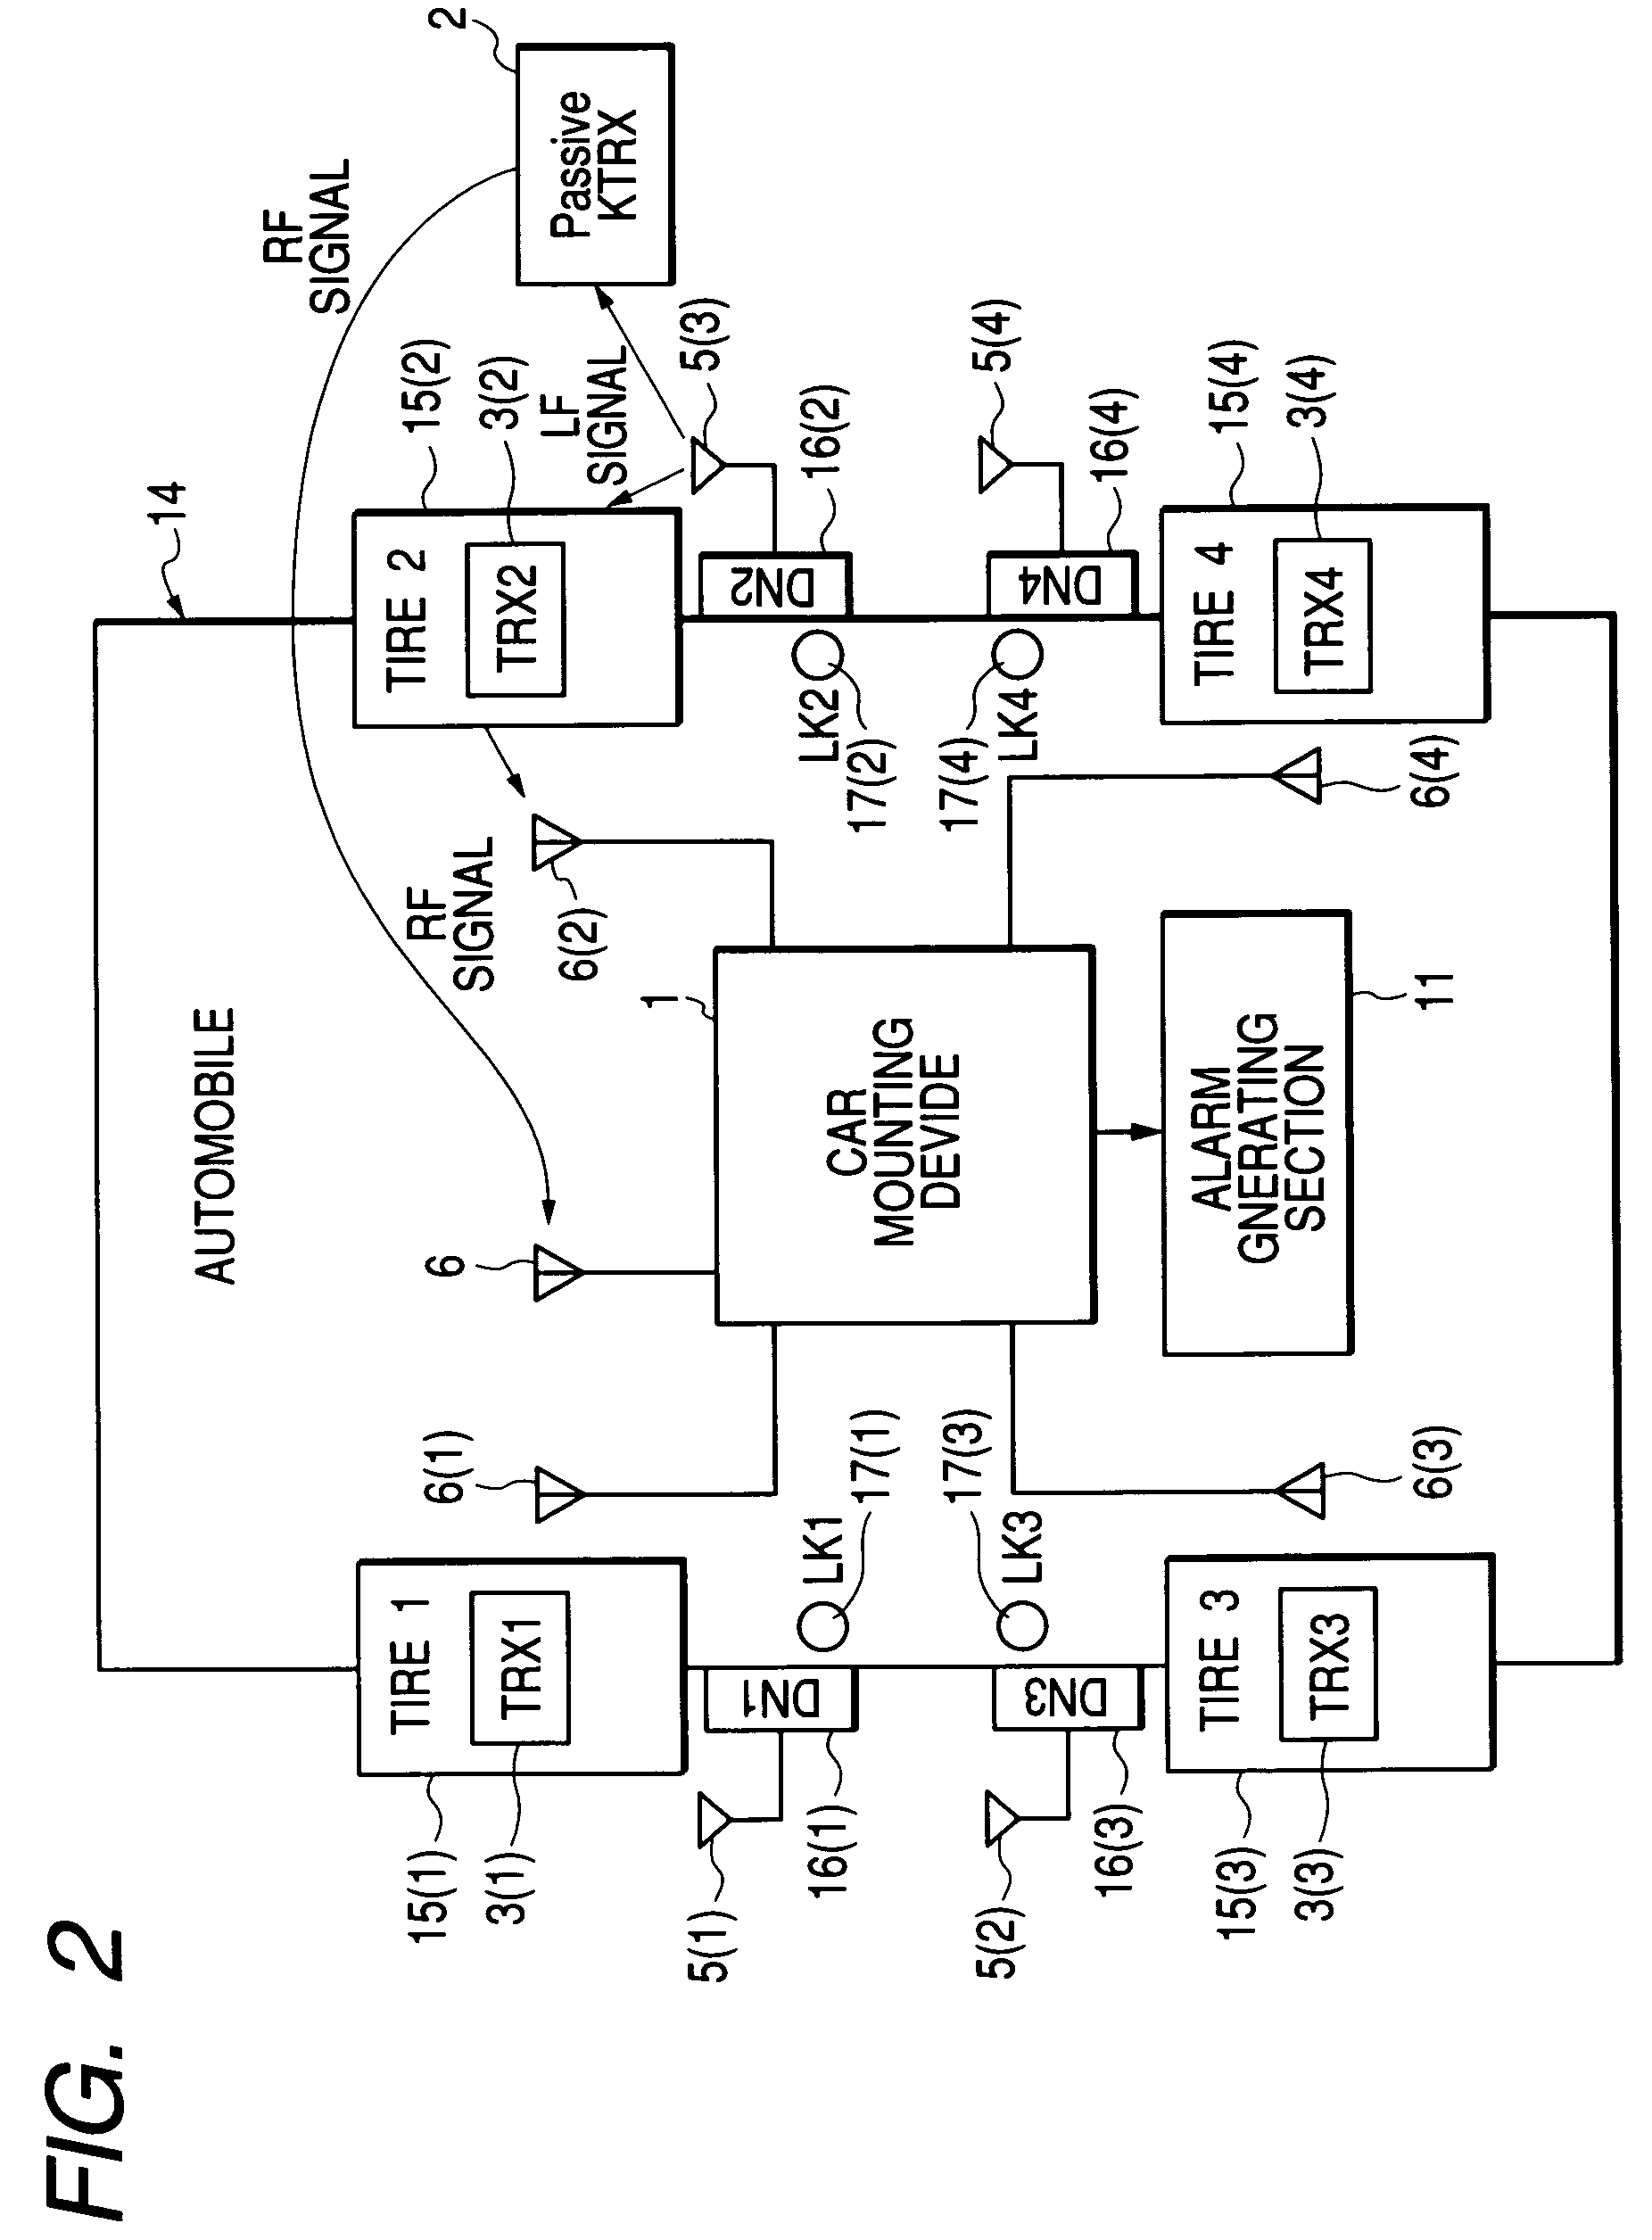 Passive keyless entry device for monitoring tire pneumatic pressure by bidirectional communication